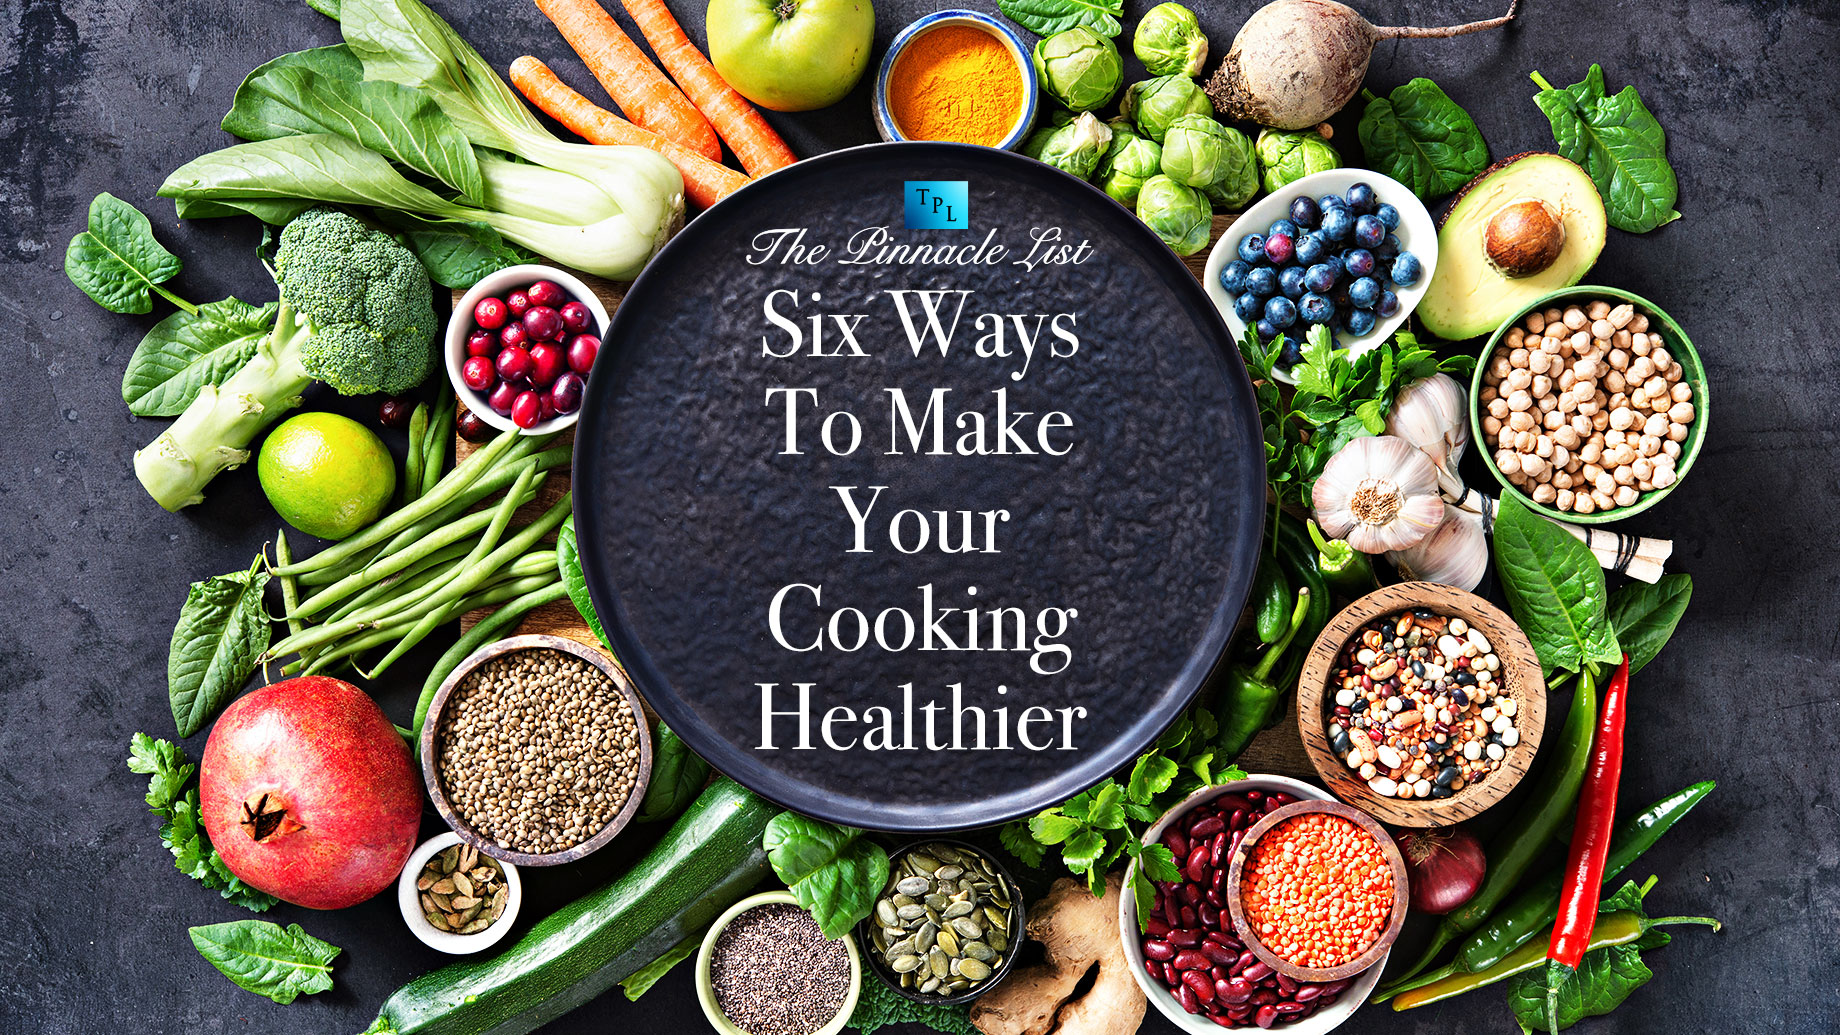 Six Ways To Make Your Cooking Healthier